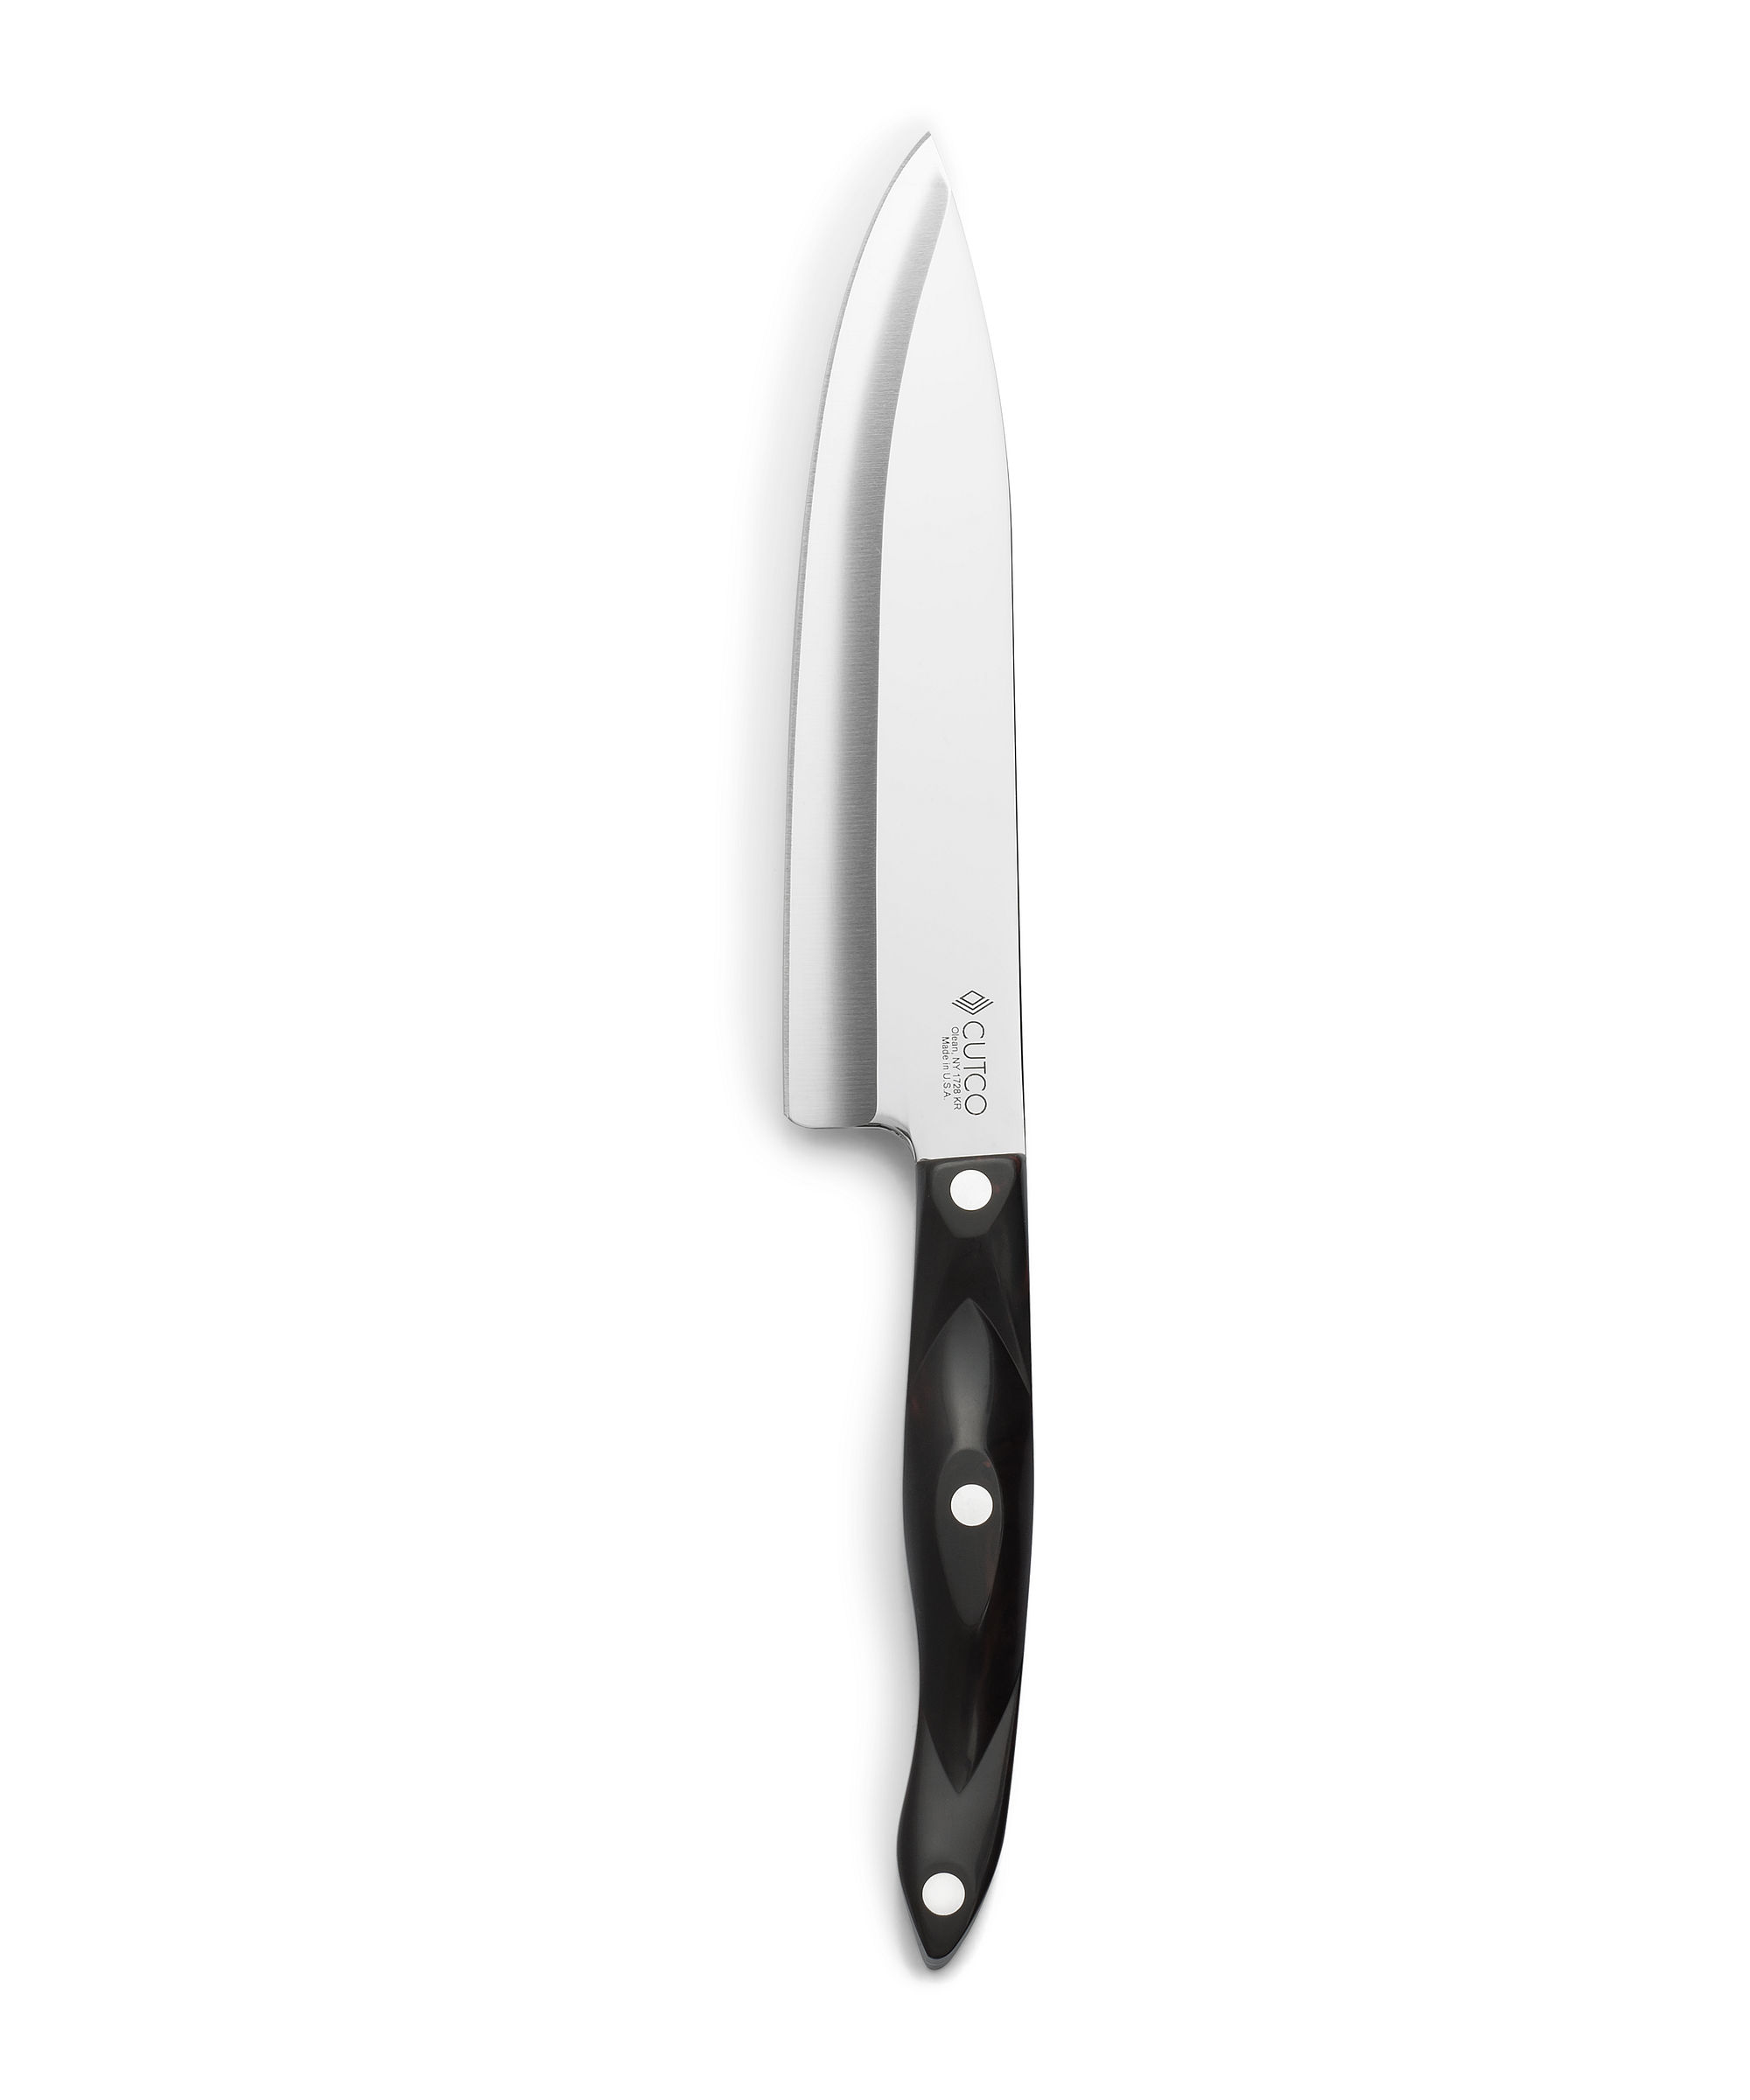 Cutco Petite Chef Knife Review: A sharp knife that's comfortable